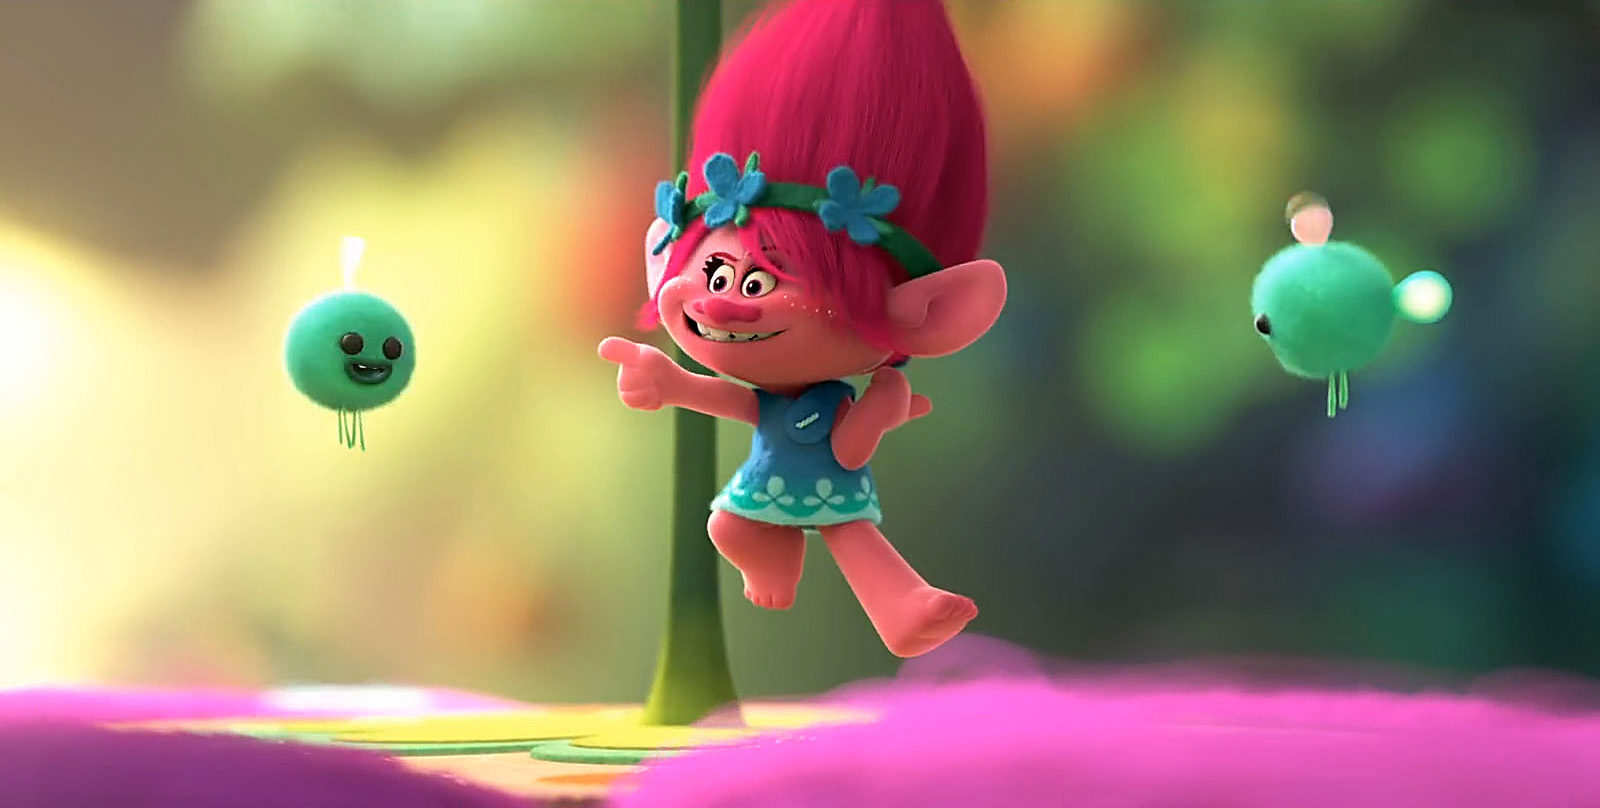 Trolls Animation Movie 2016 Wallpapers  HD Wallpapers  ID 18873